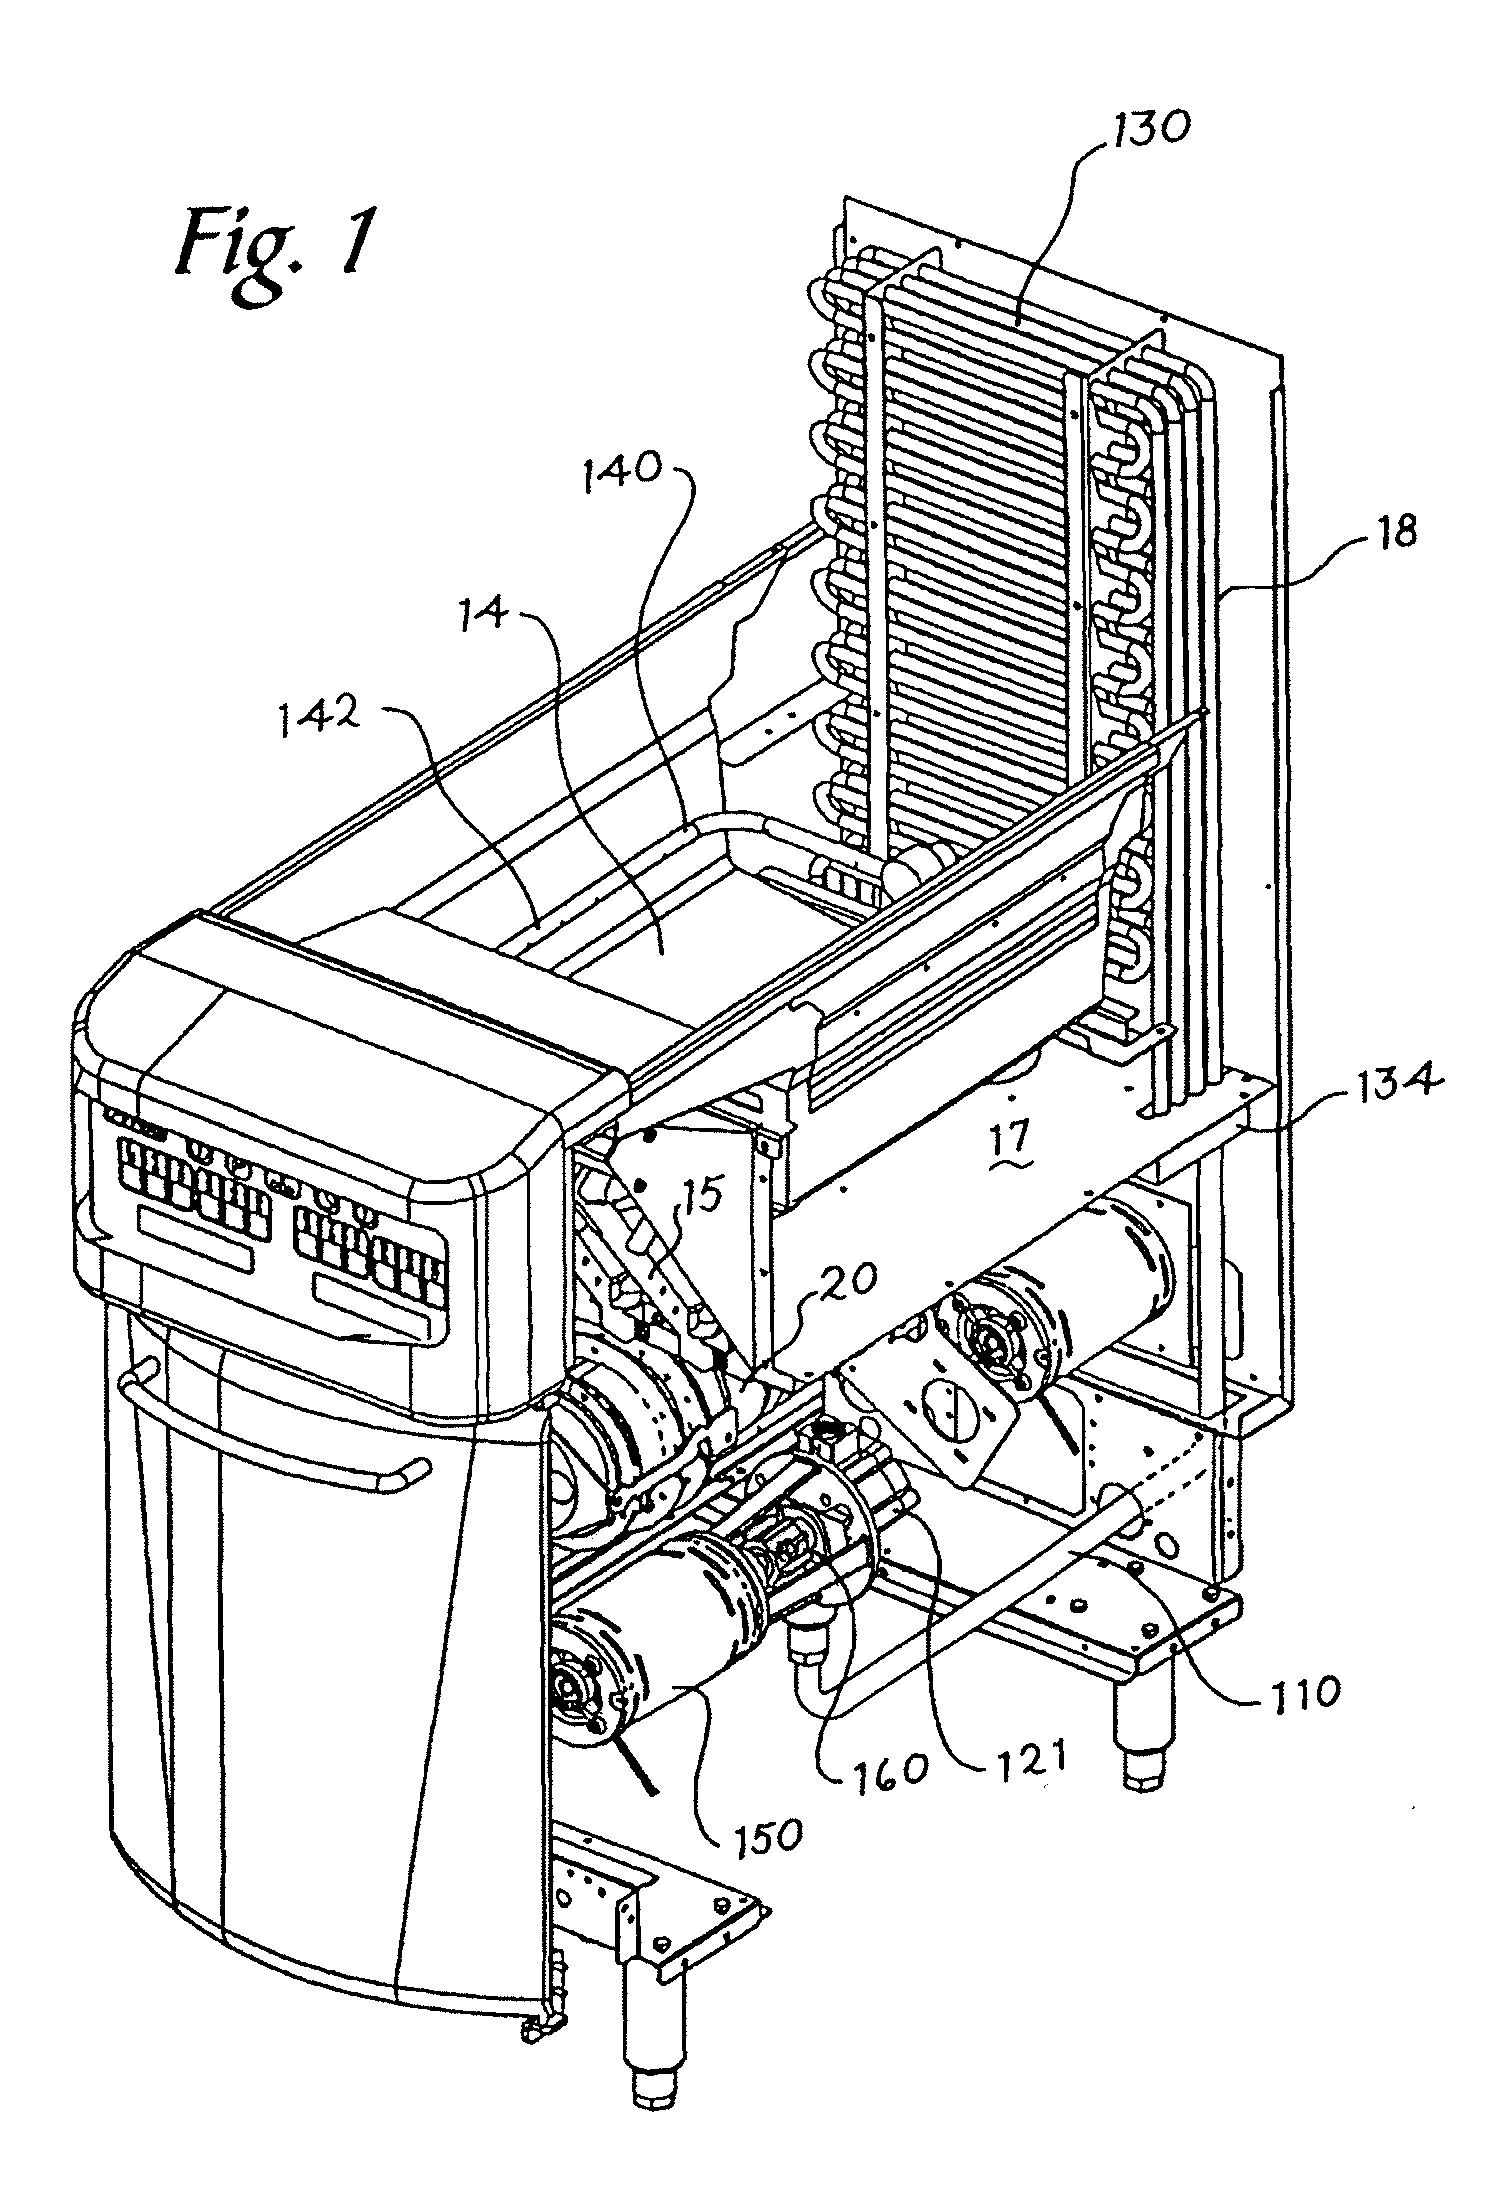 Continuously operating filtering apparatus